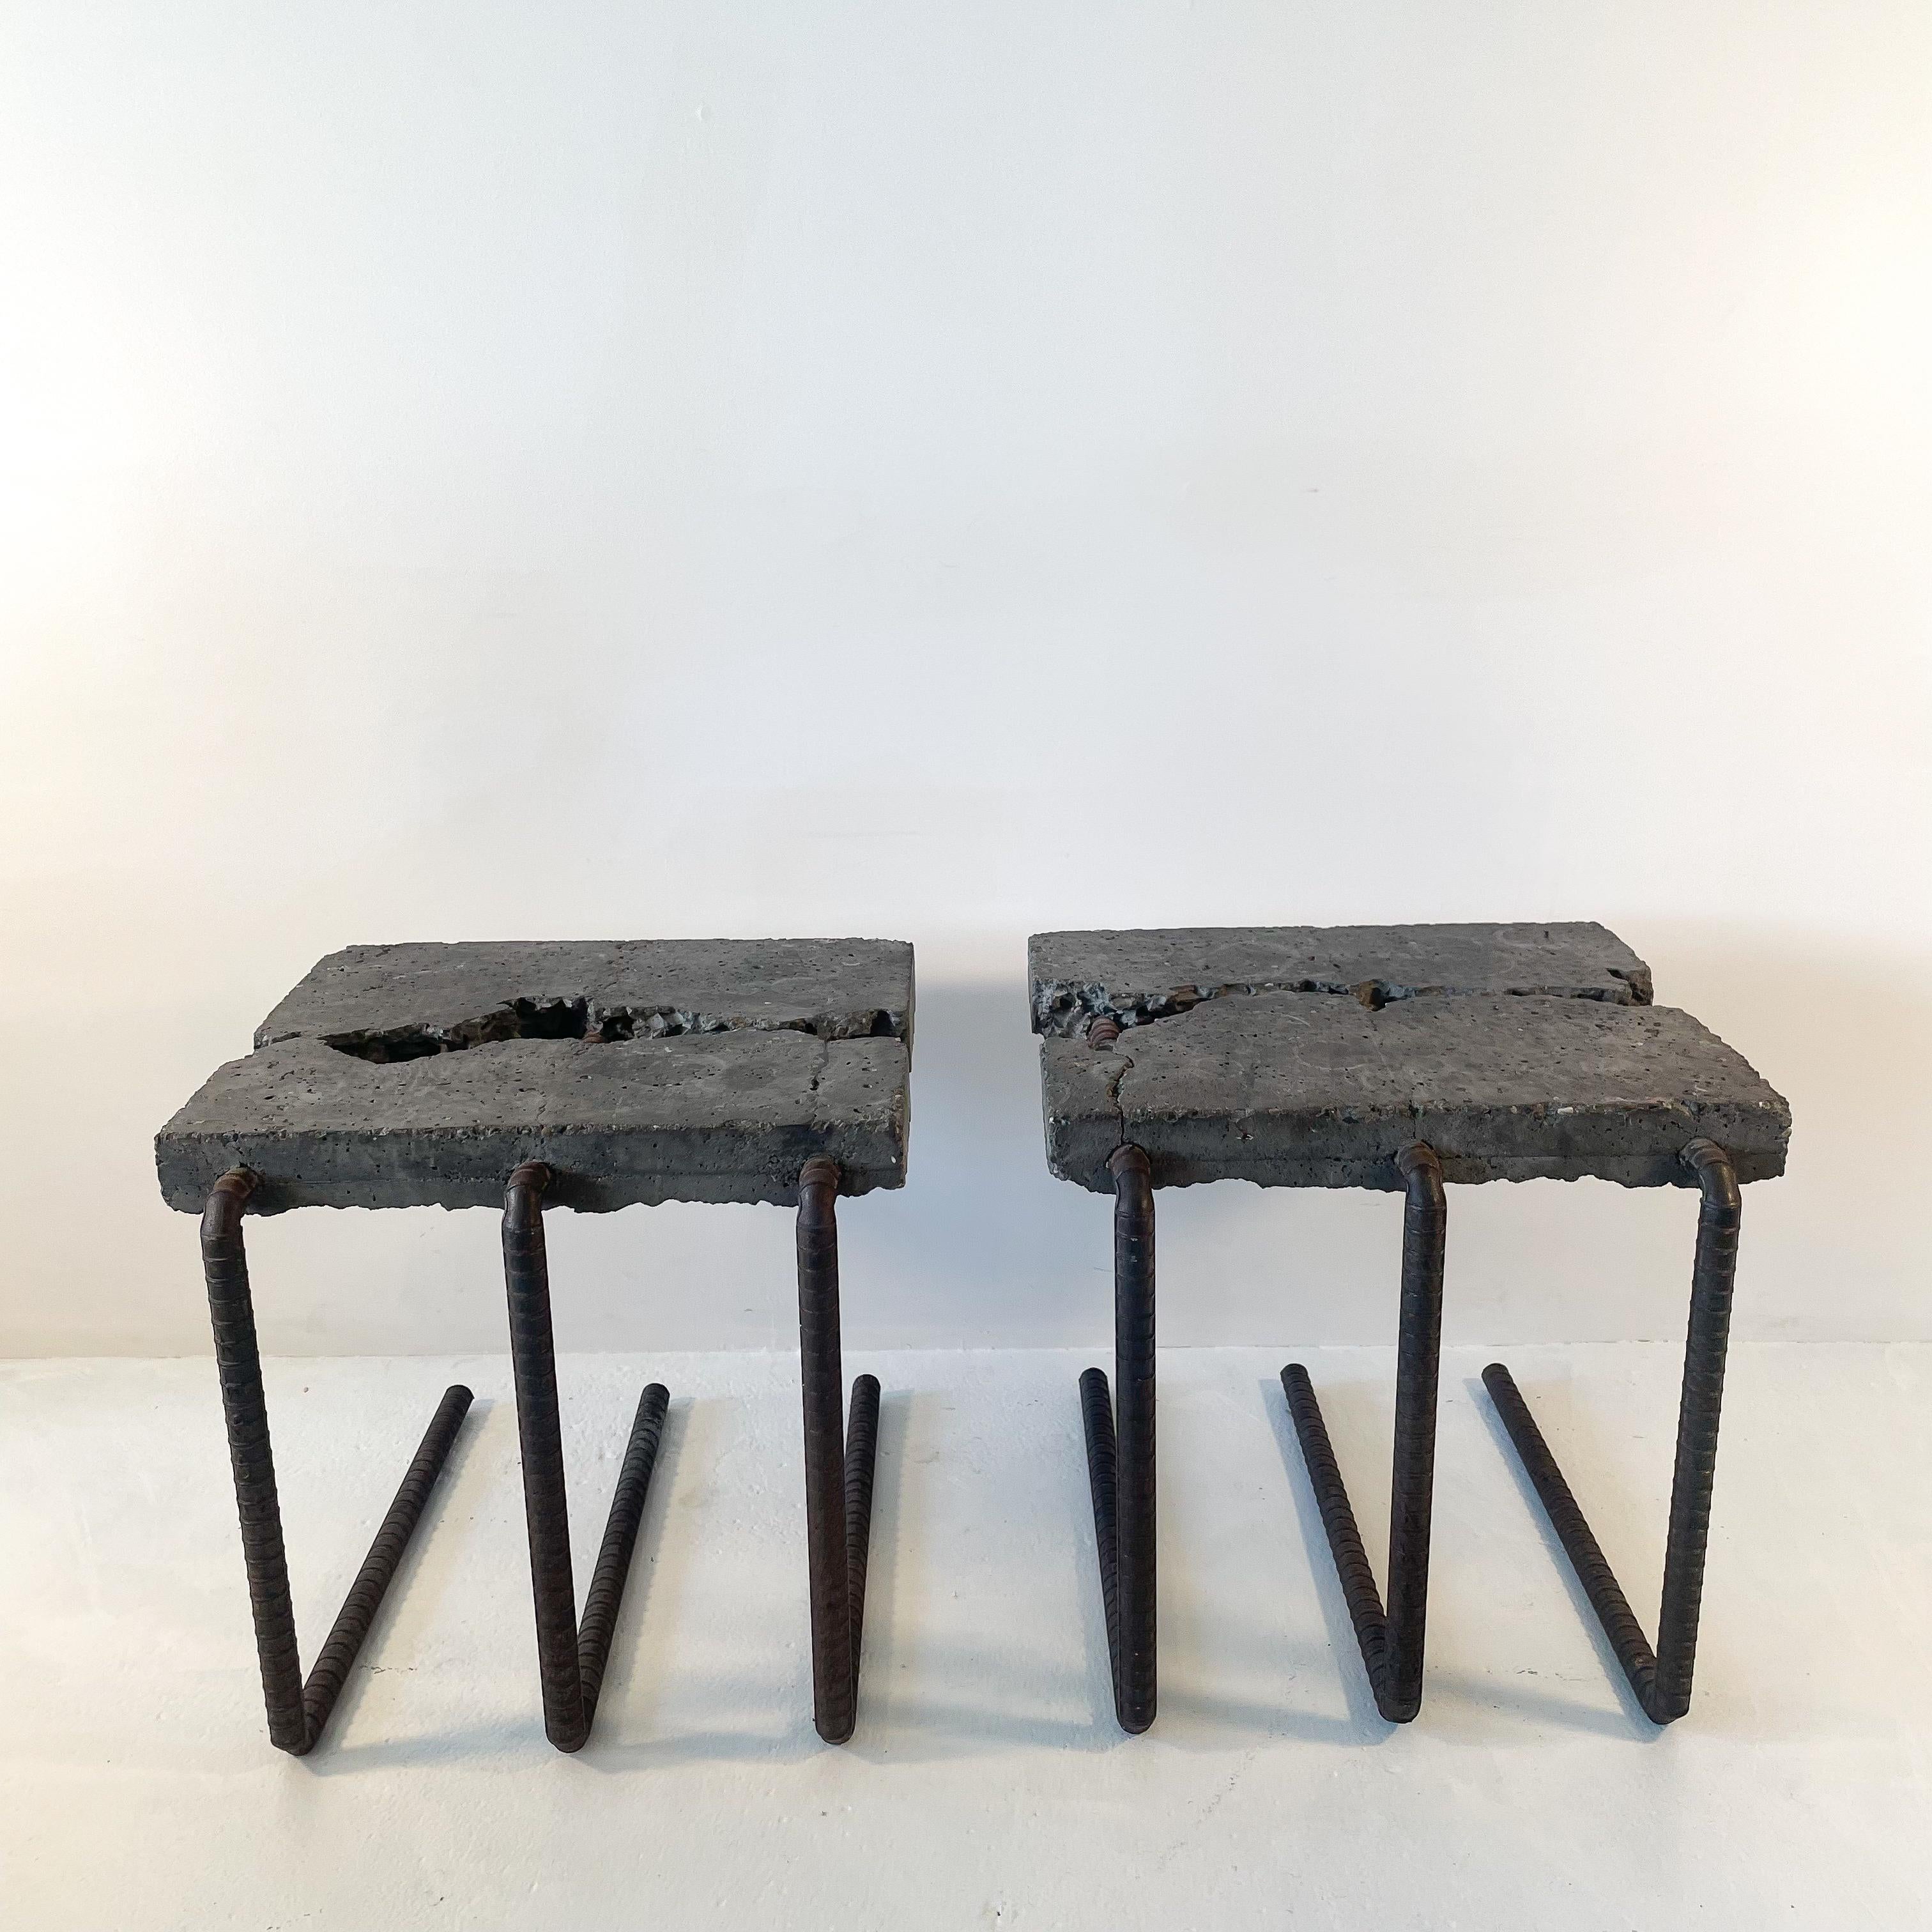 Pair of two industrial, brutalist end tables made from concrete and rebar.

Also function as stools as they are incredibly strong and an interesting height.

Open to splitting the set if desired (but for a premium as they really shouldn't be